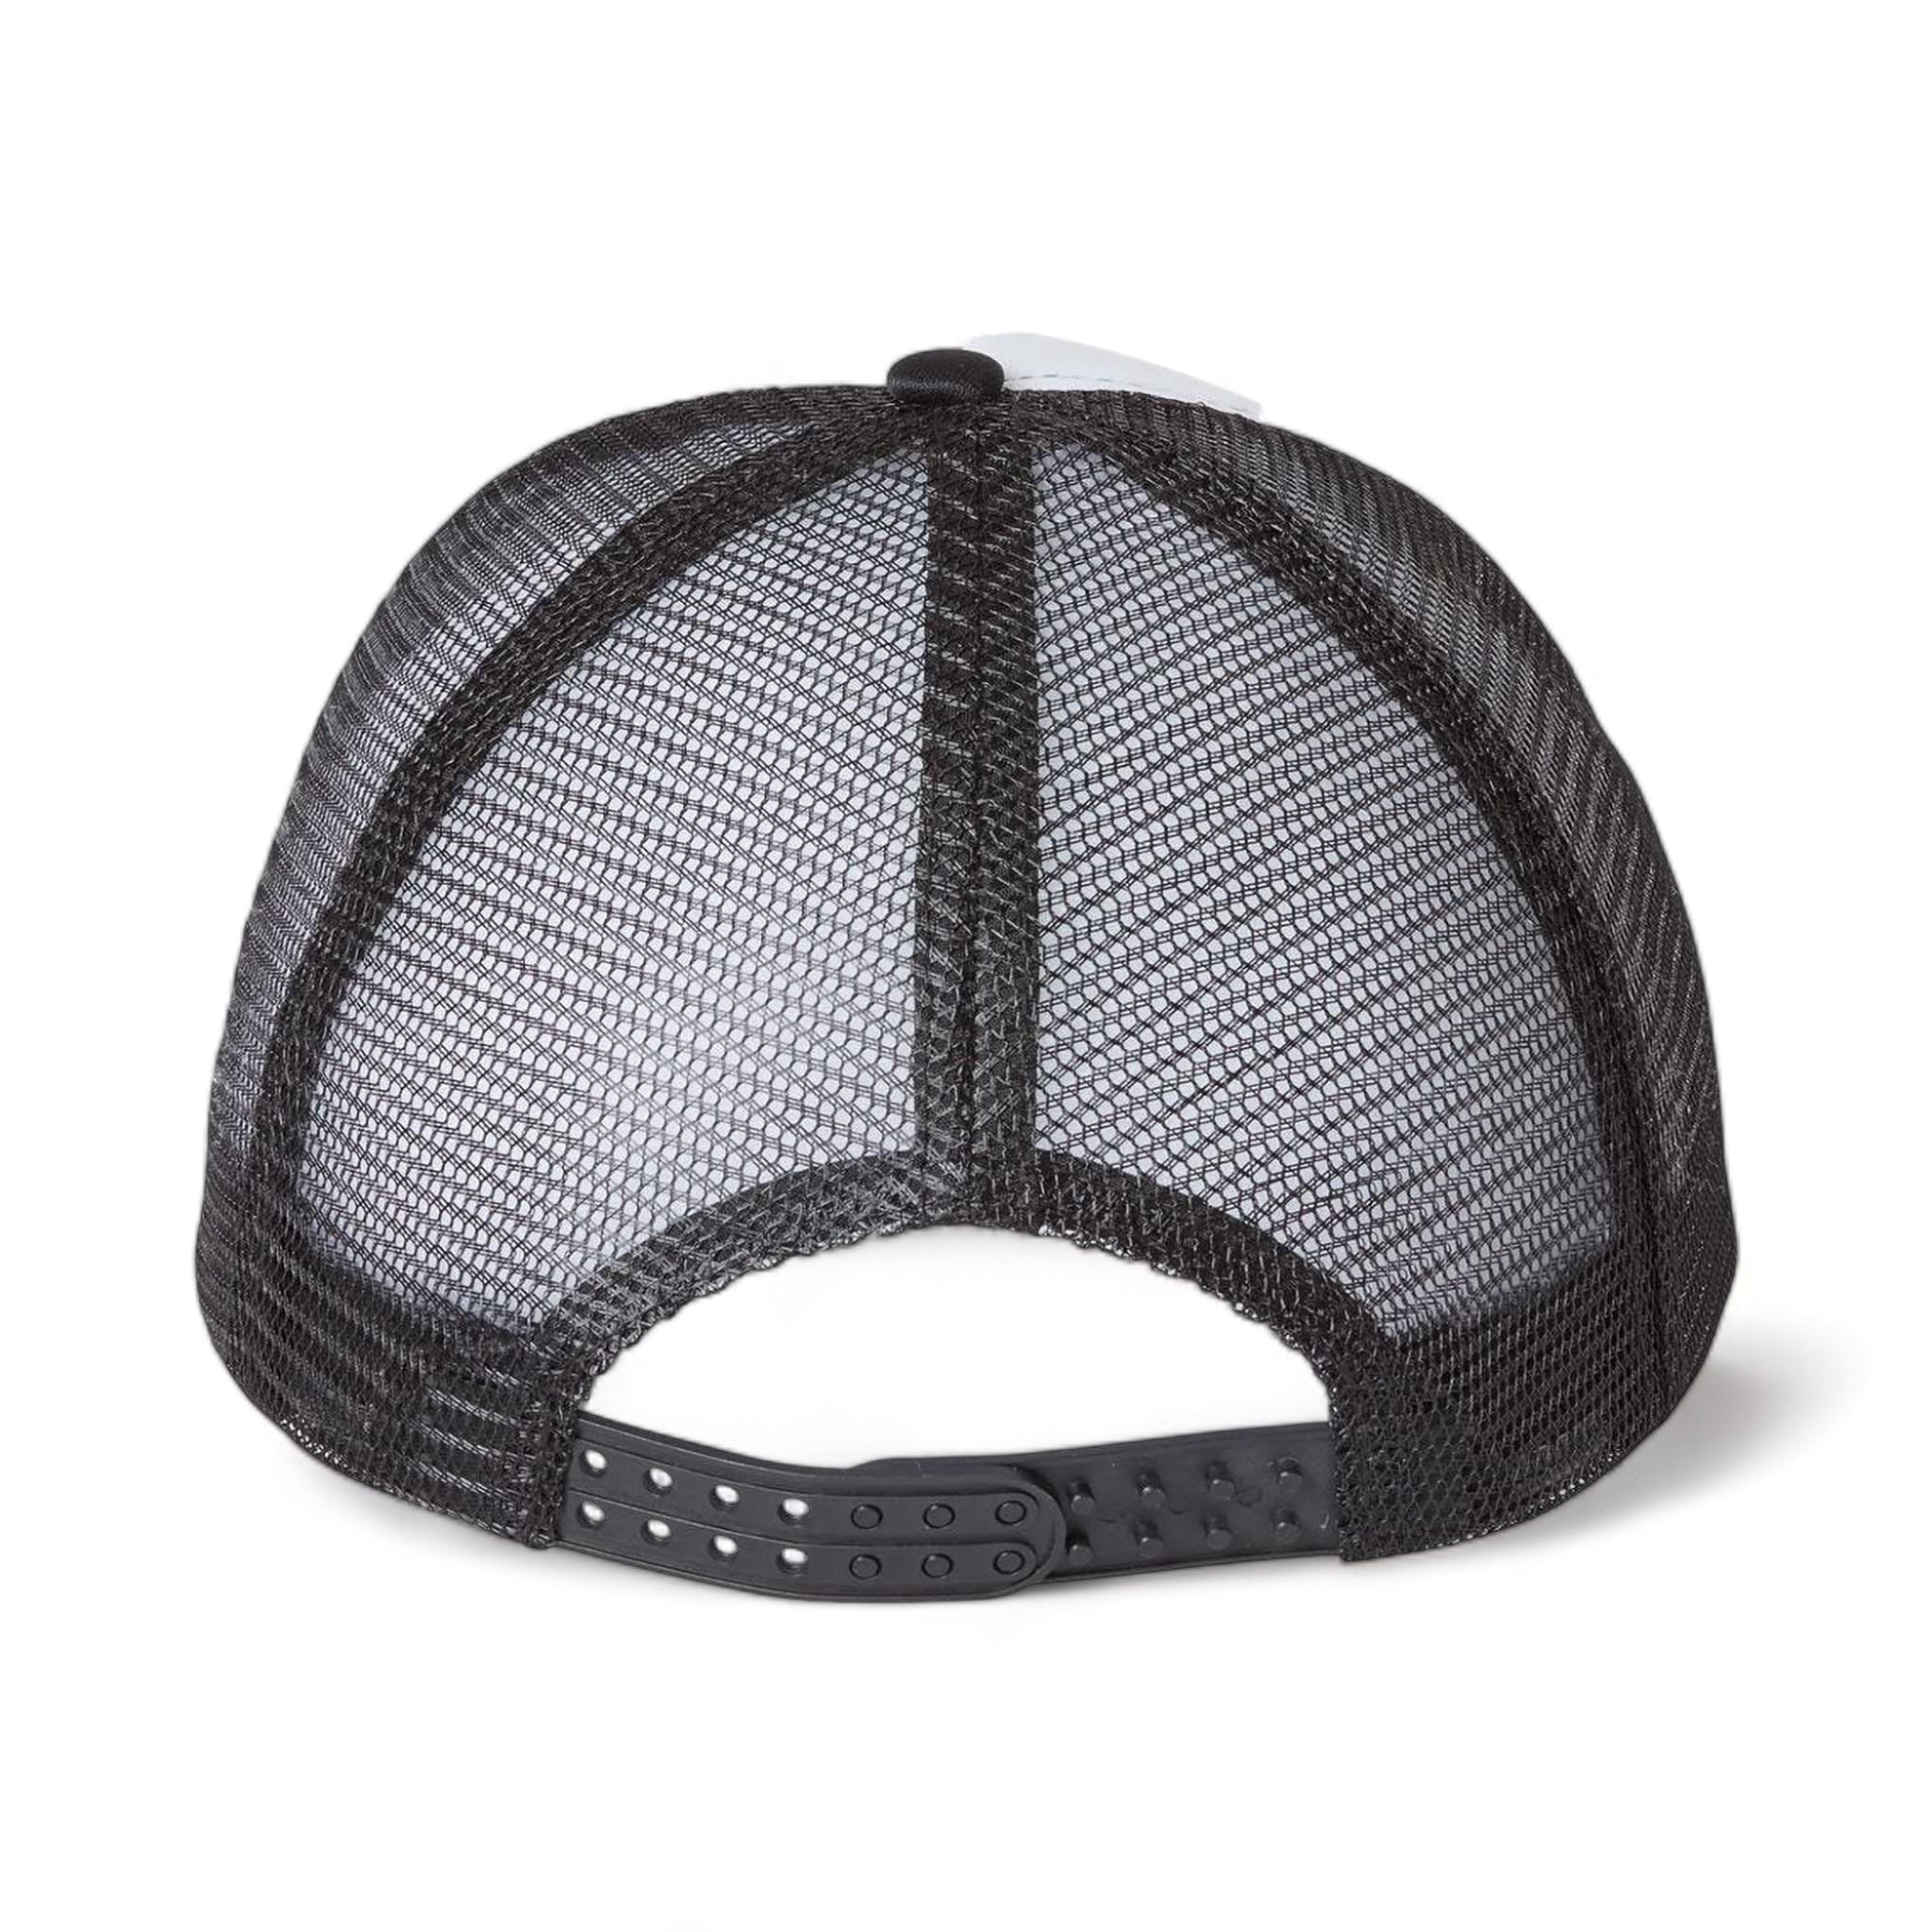 Back view of Valucap VC700 custom hat in white and black